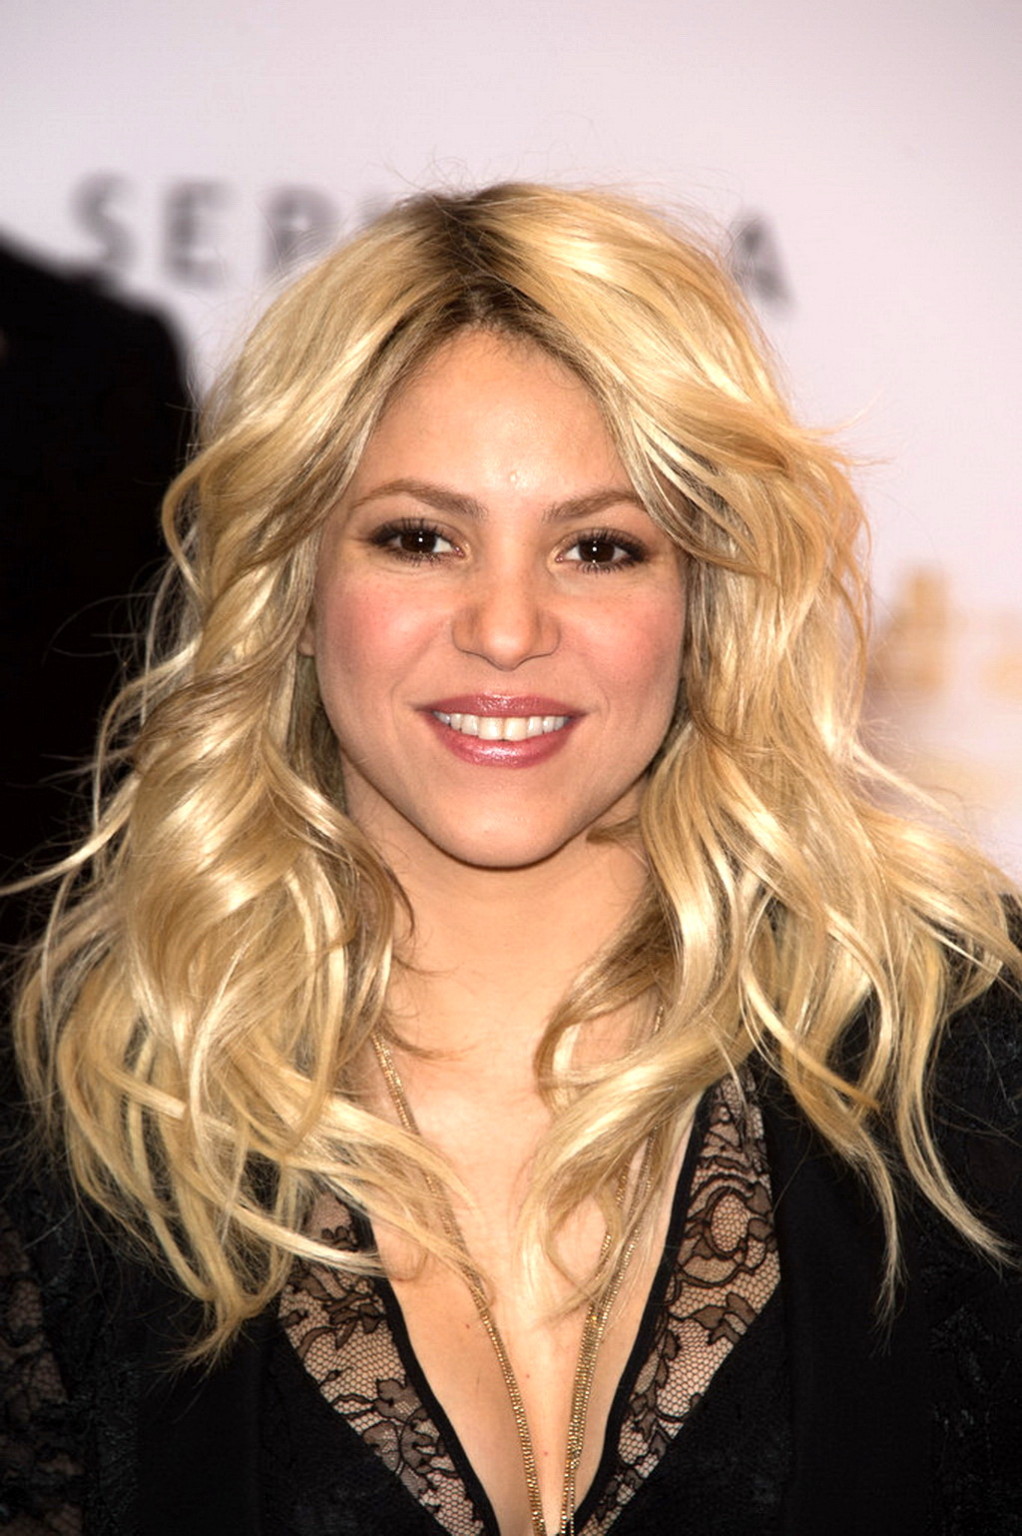 Shakira showing huge cleavage at the 'S by Shakira' perfume launch at Sephora in #75236978